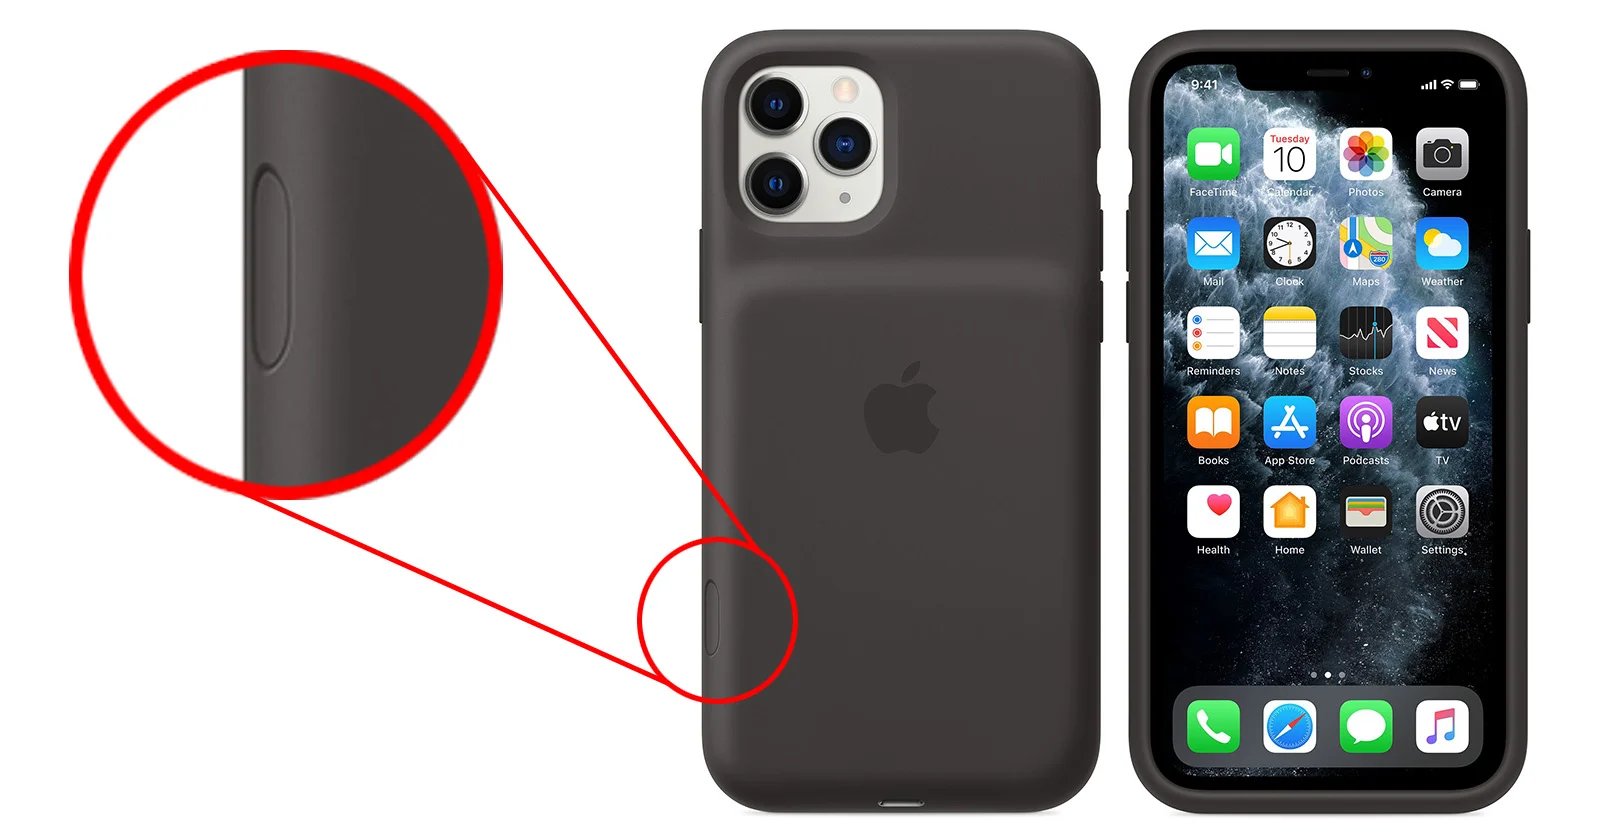 apple-launches-iphone-11-smart-battery-cases-with-physical-camera-button